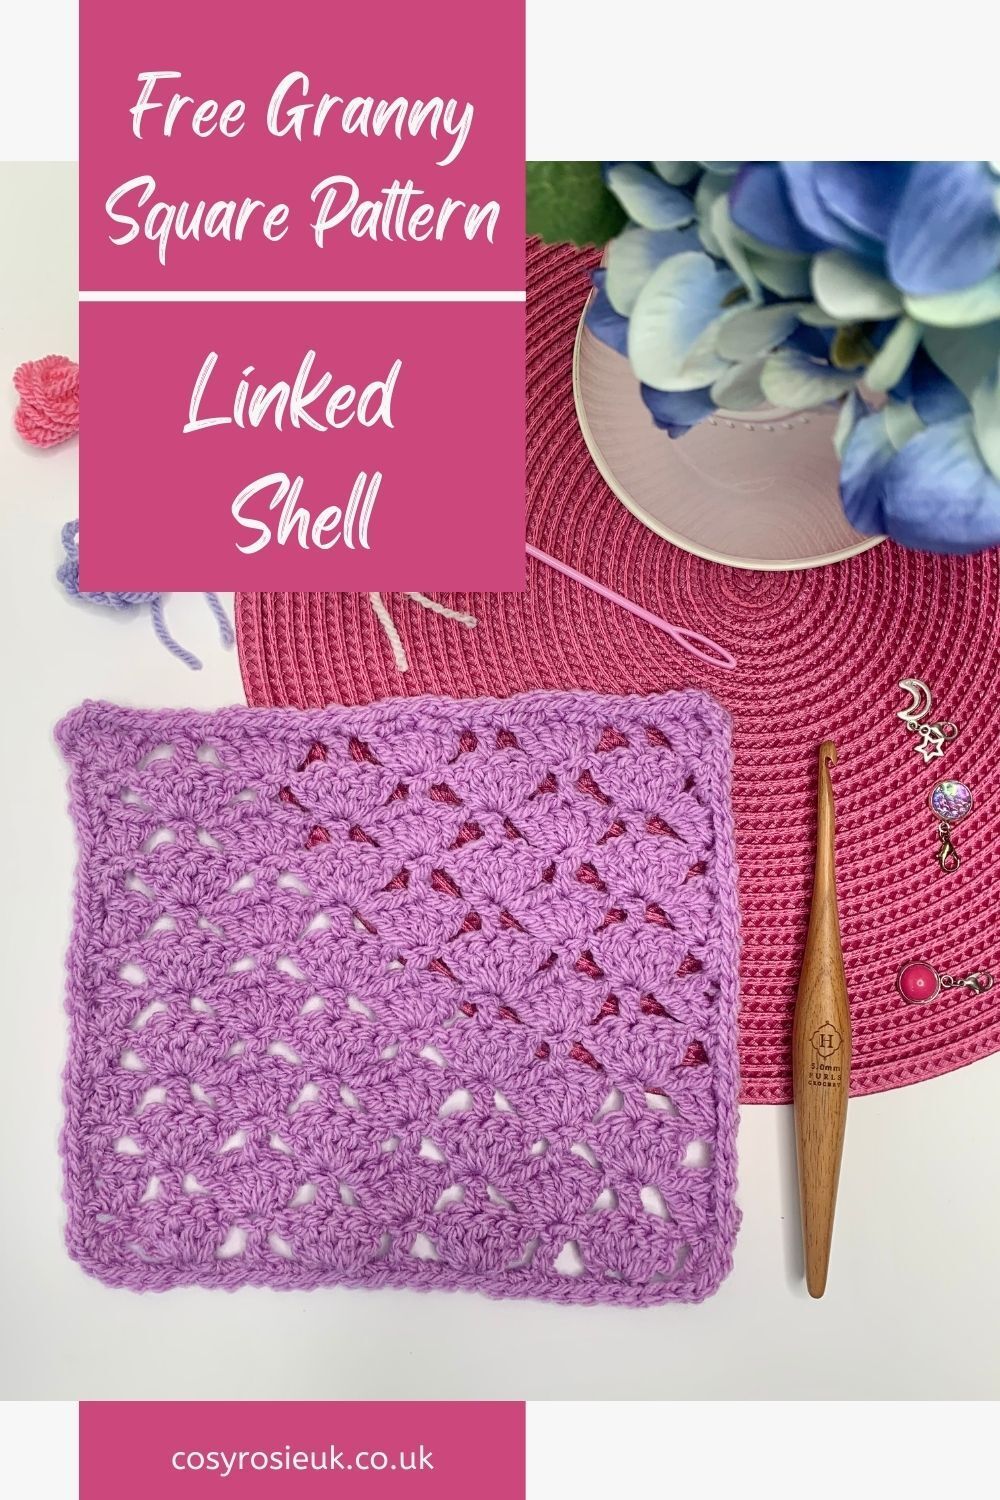 How to crochet the linked shell stitch granny square